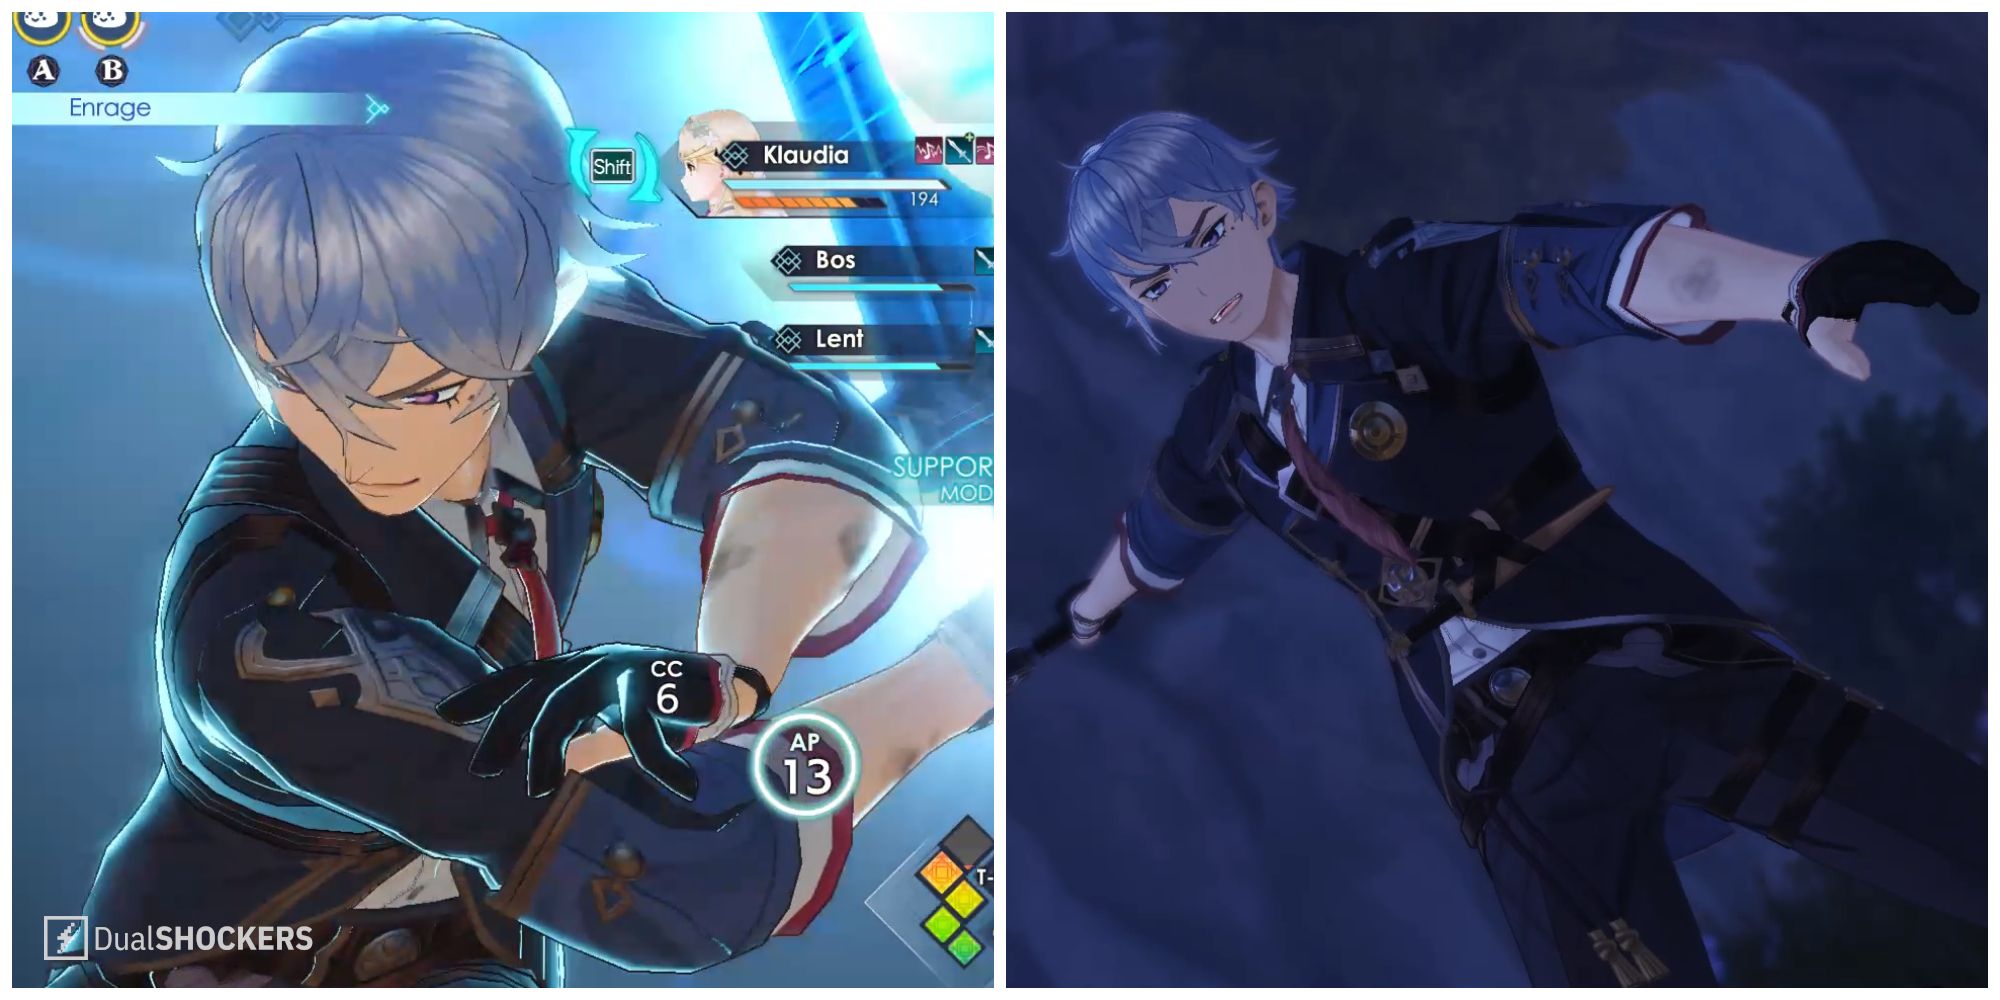 Split image of Bos completing an Action Order and Bos after a battle in Atelier Ryza 3.